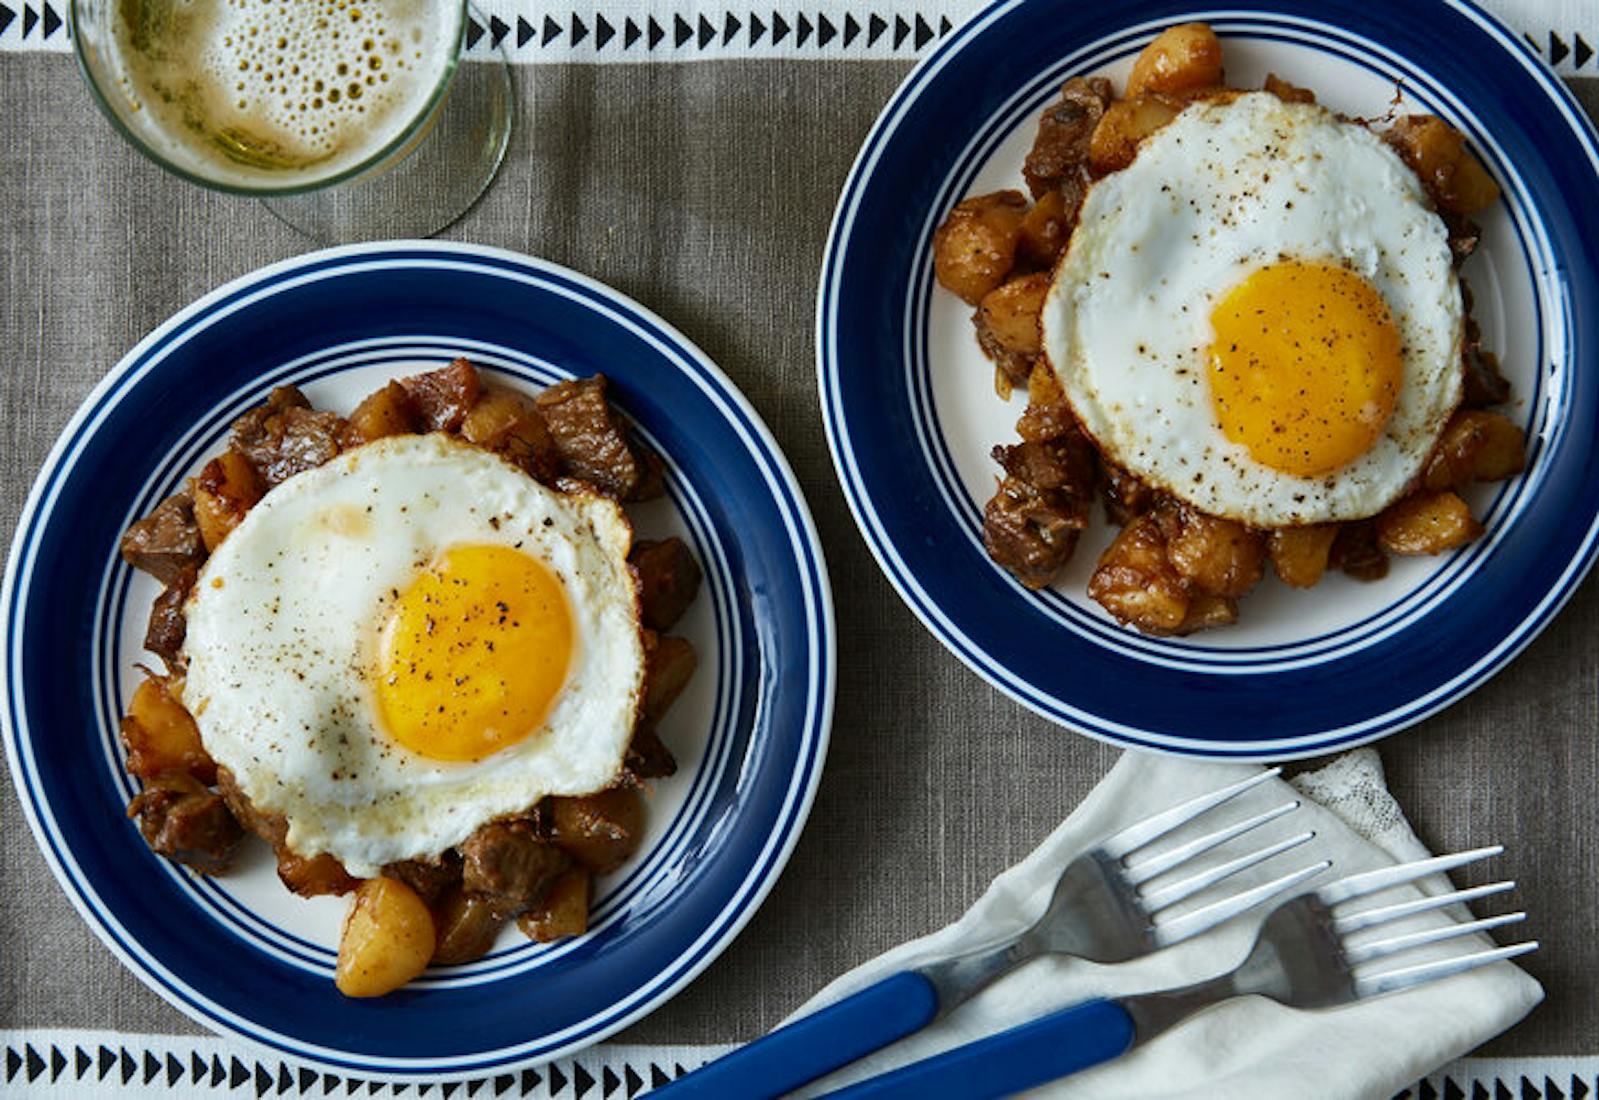 Danish hash topped with sunny side up eggs alongside glass of white wine atop grey tablecloth.